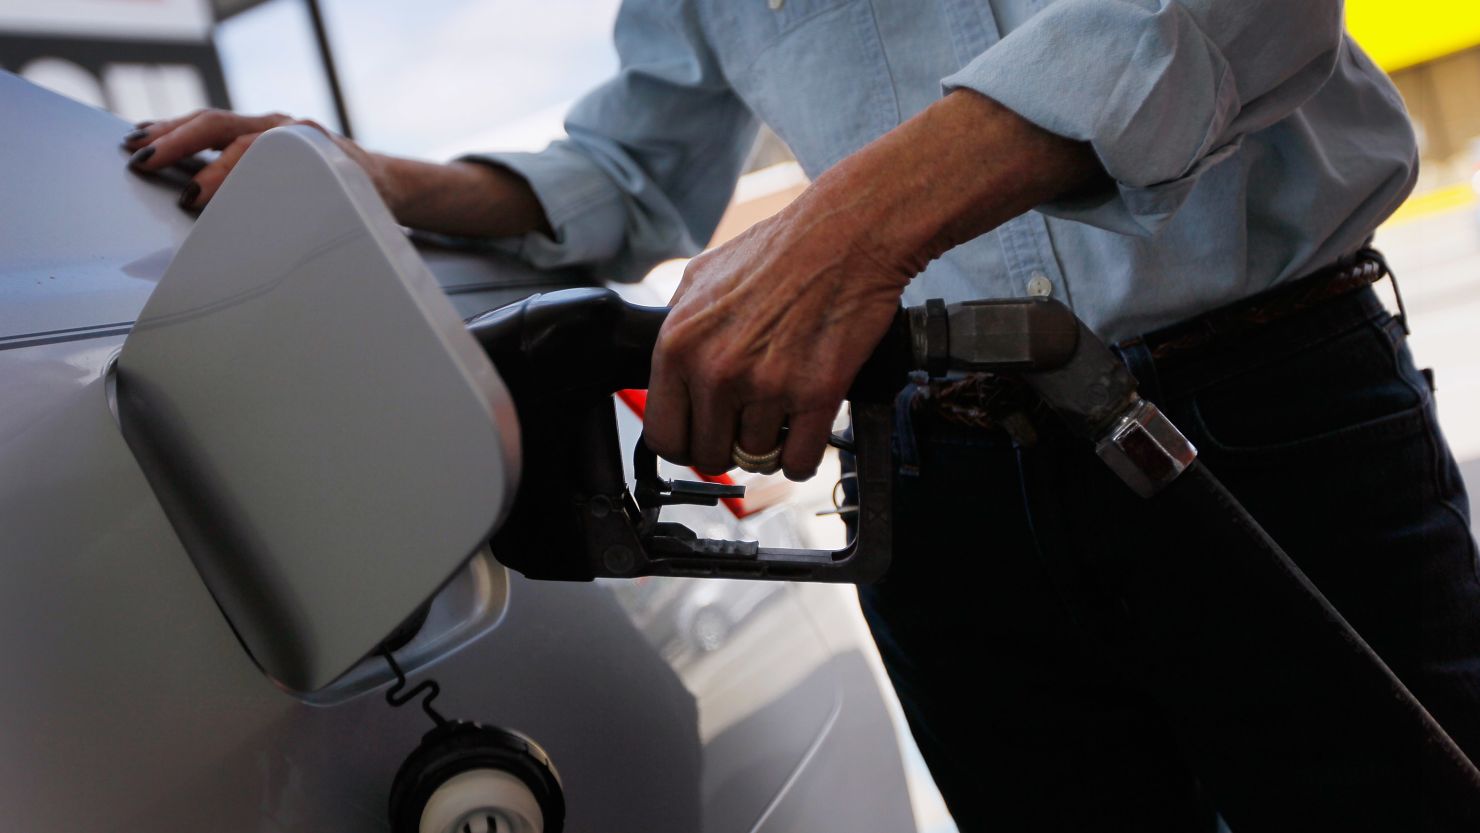 U.S. gasoline prices crept up by about 2 cents per gallon over the past two weeks, according to he latest Lundberg Survey.